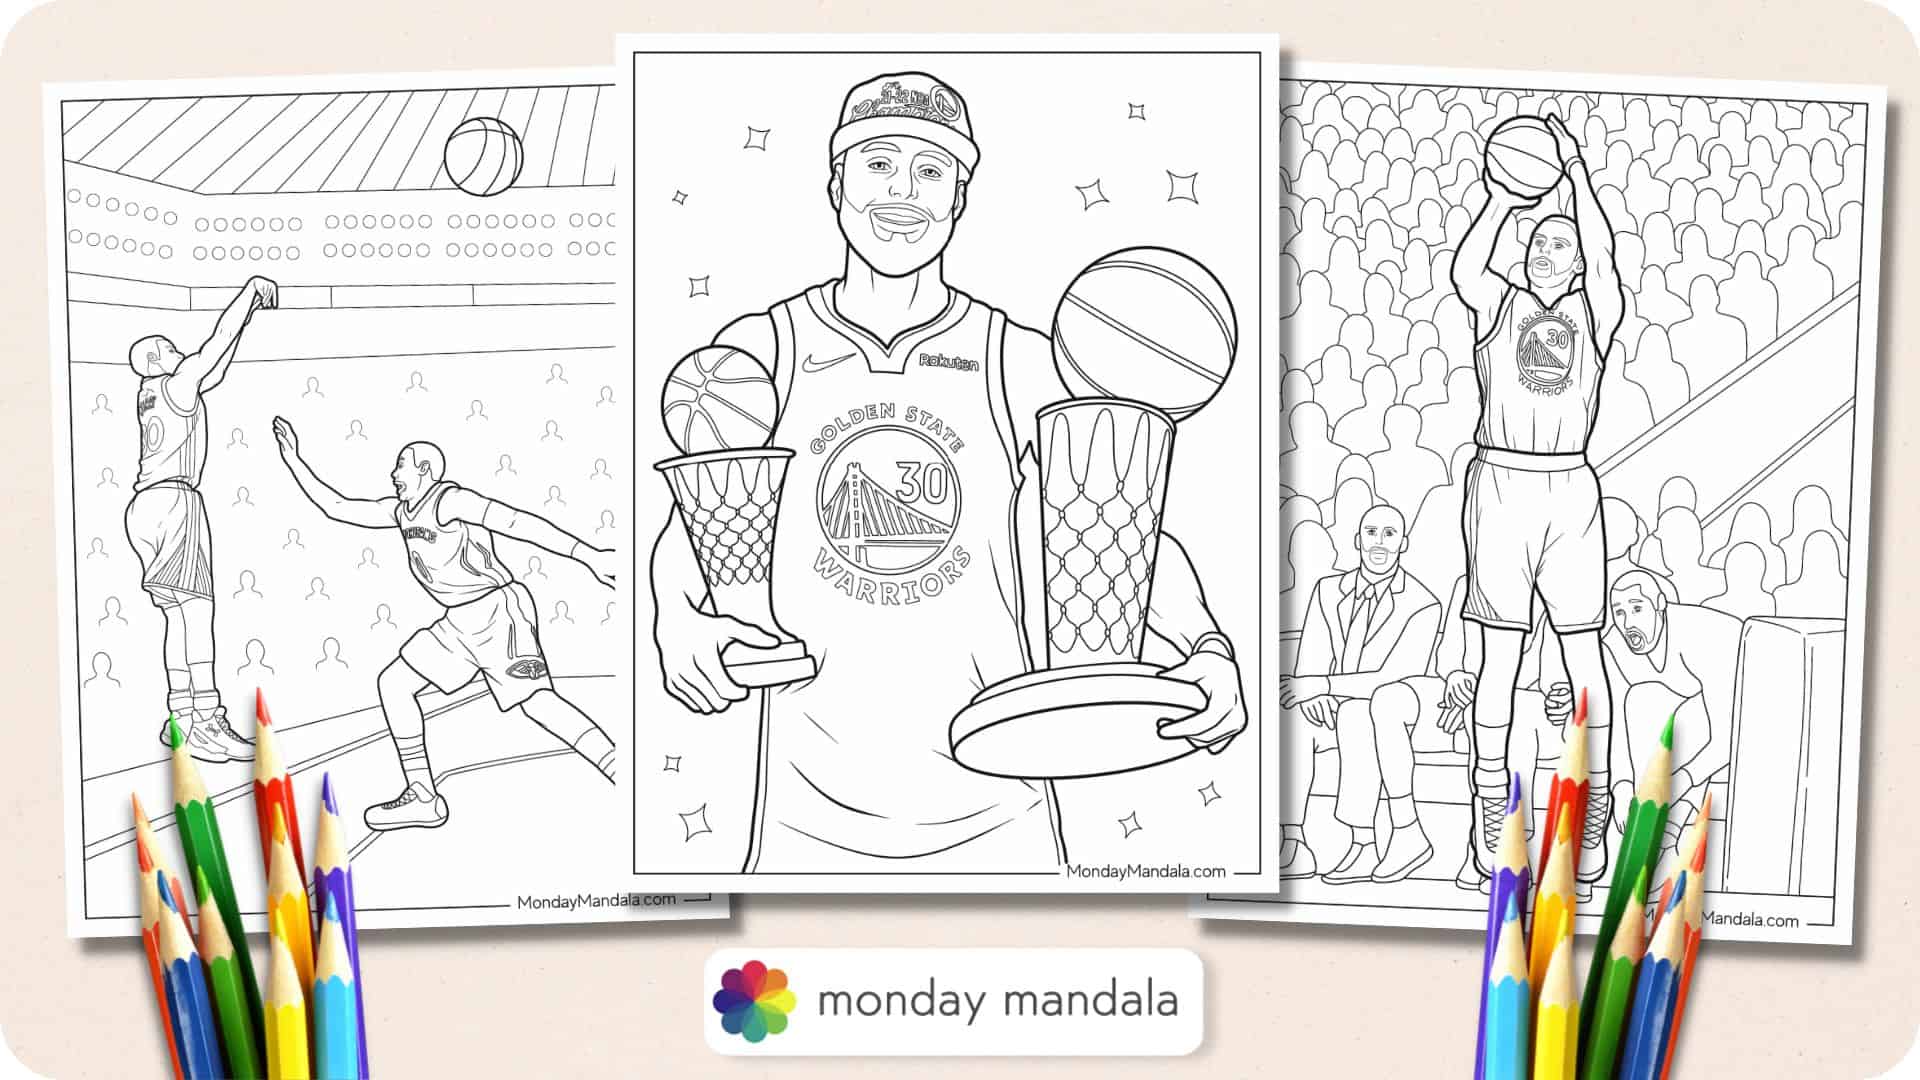 Steph curry coloring pages free pdf printables